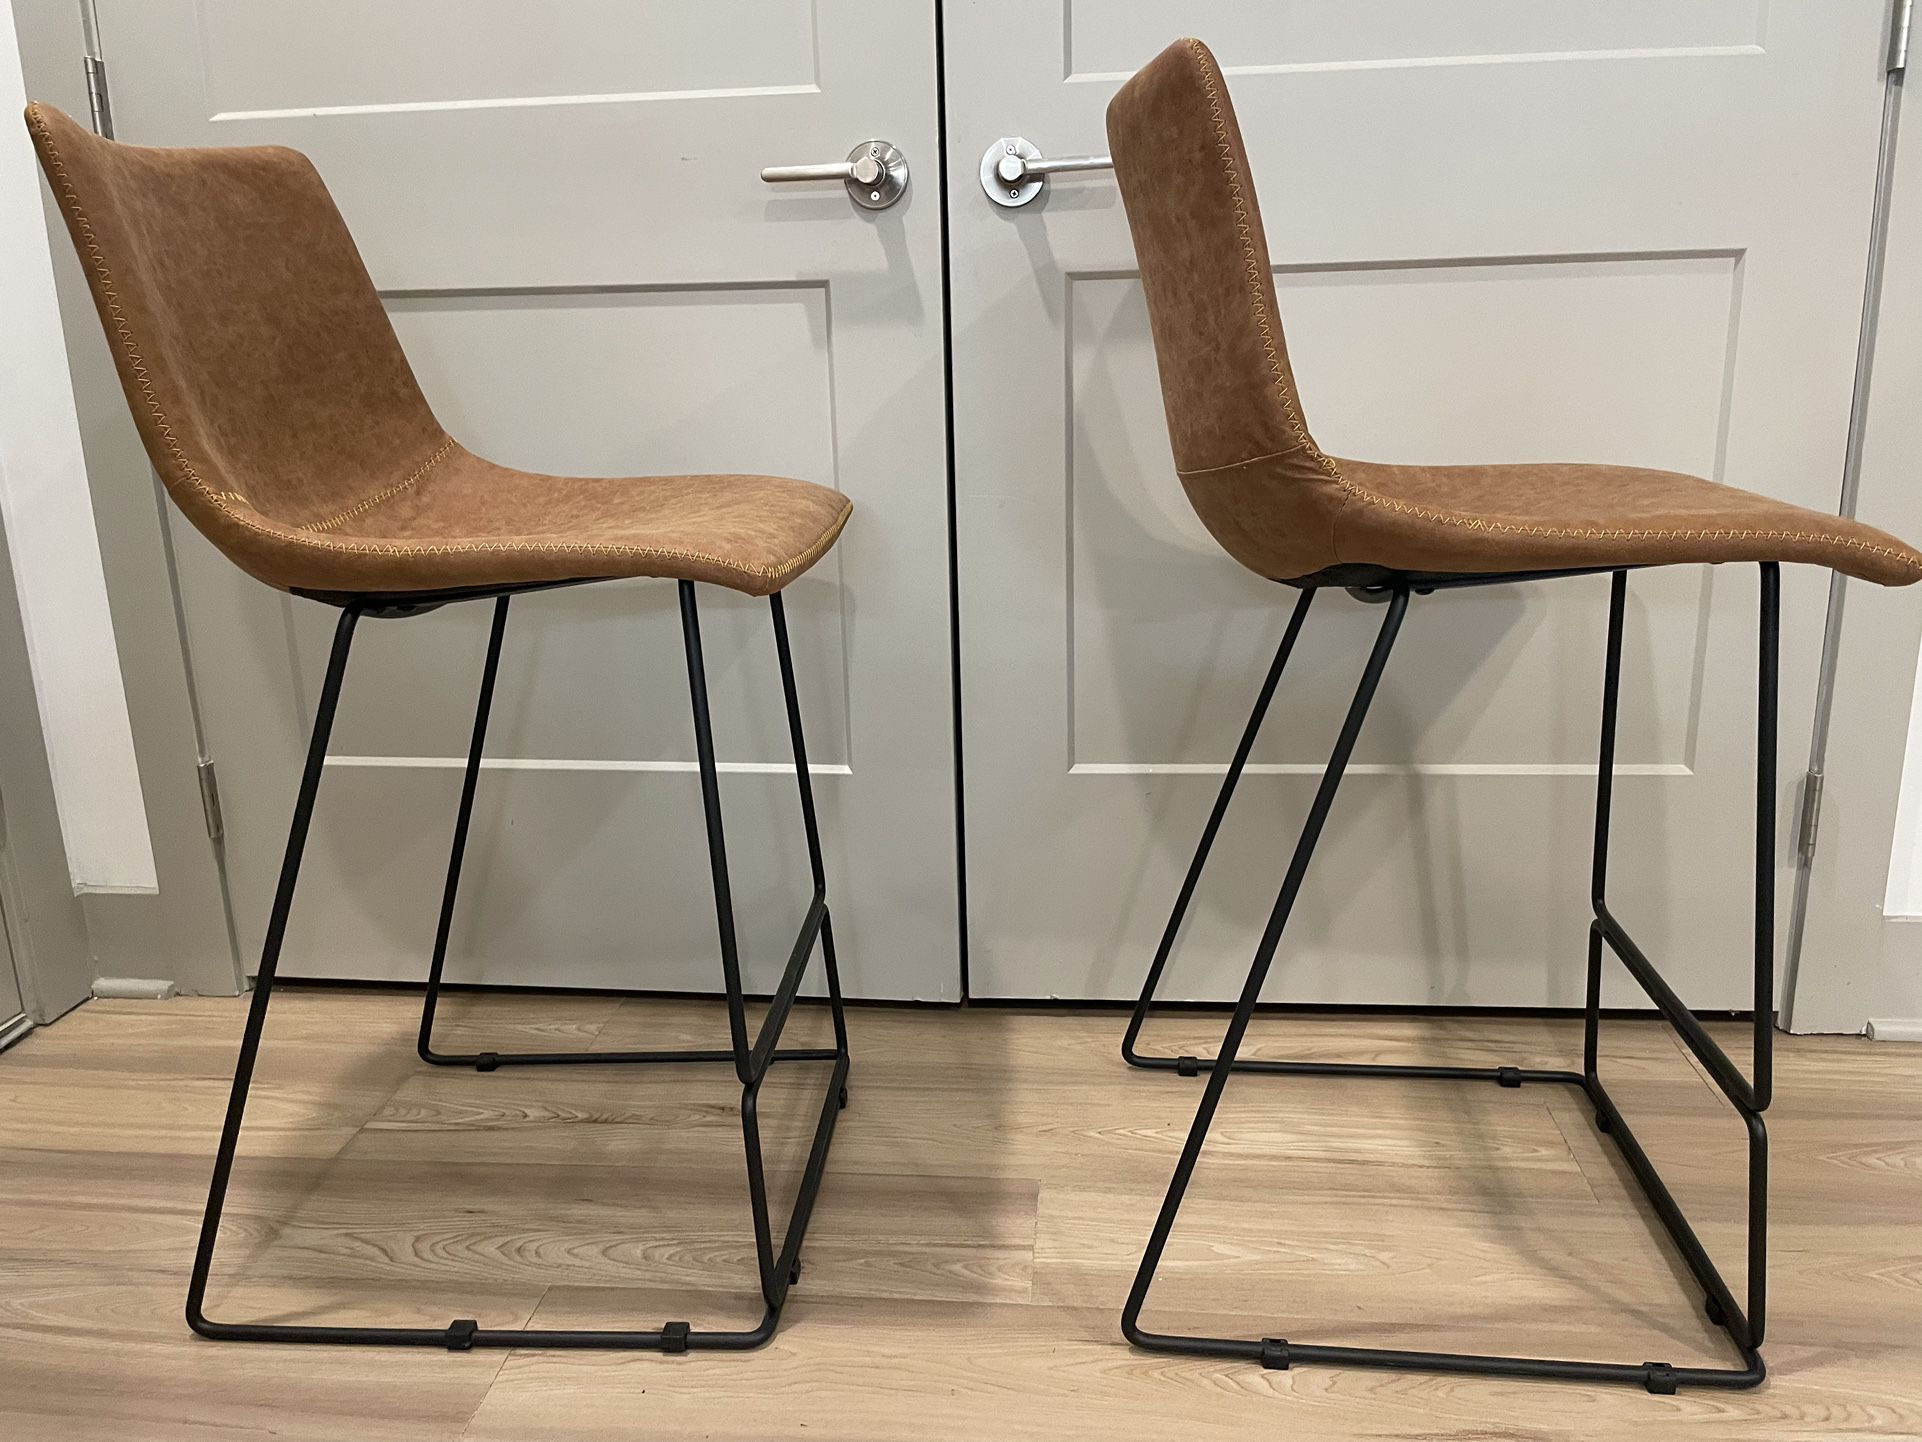 Two Chairs  For Sale $45